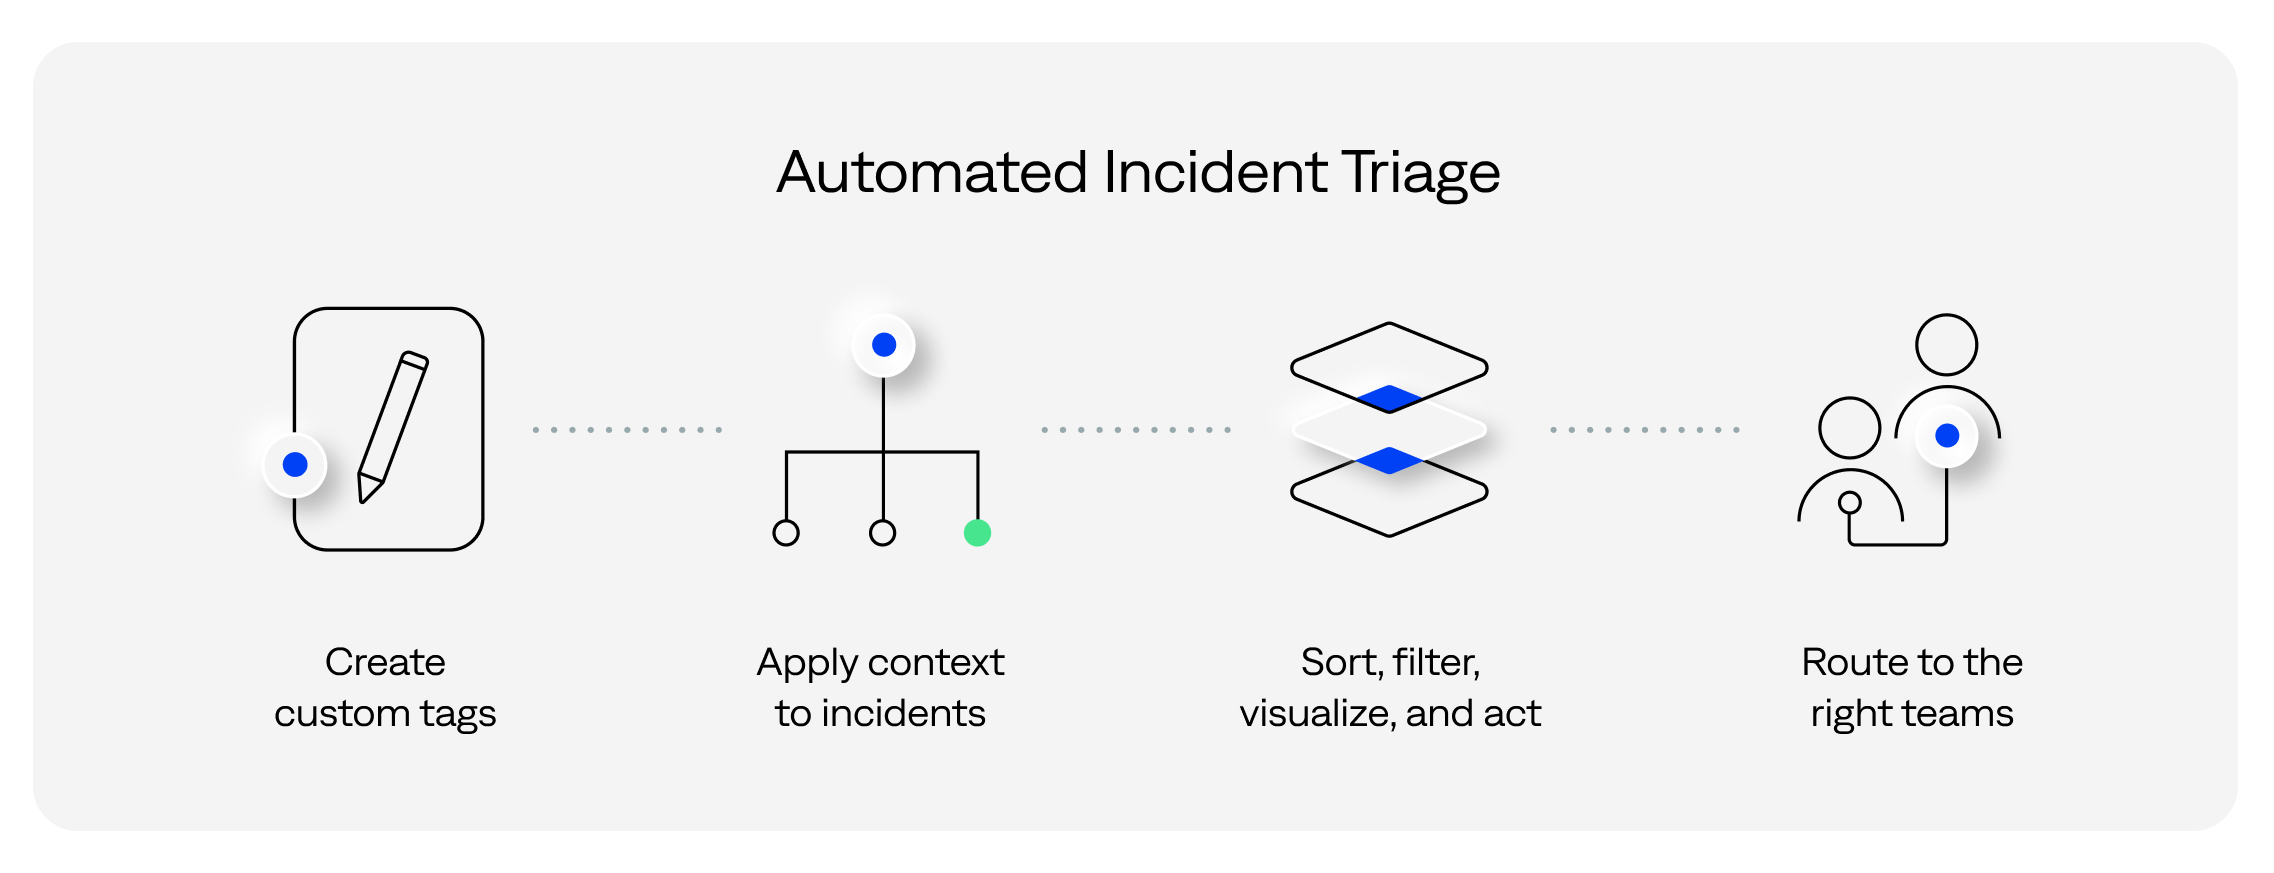 Core steps of automating incident triage